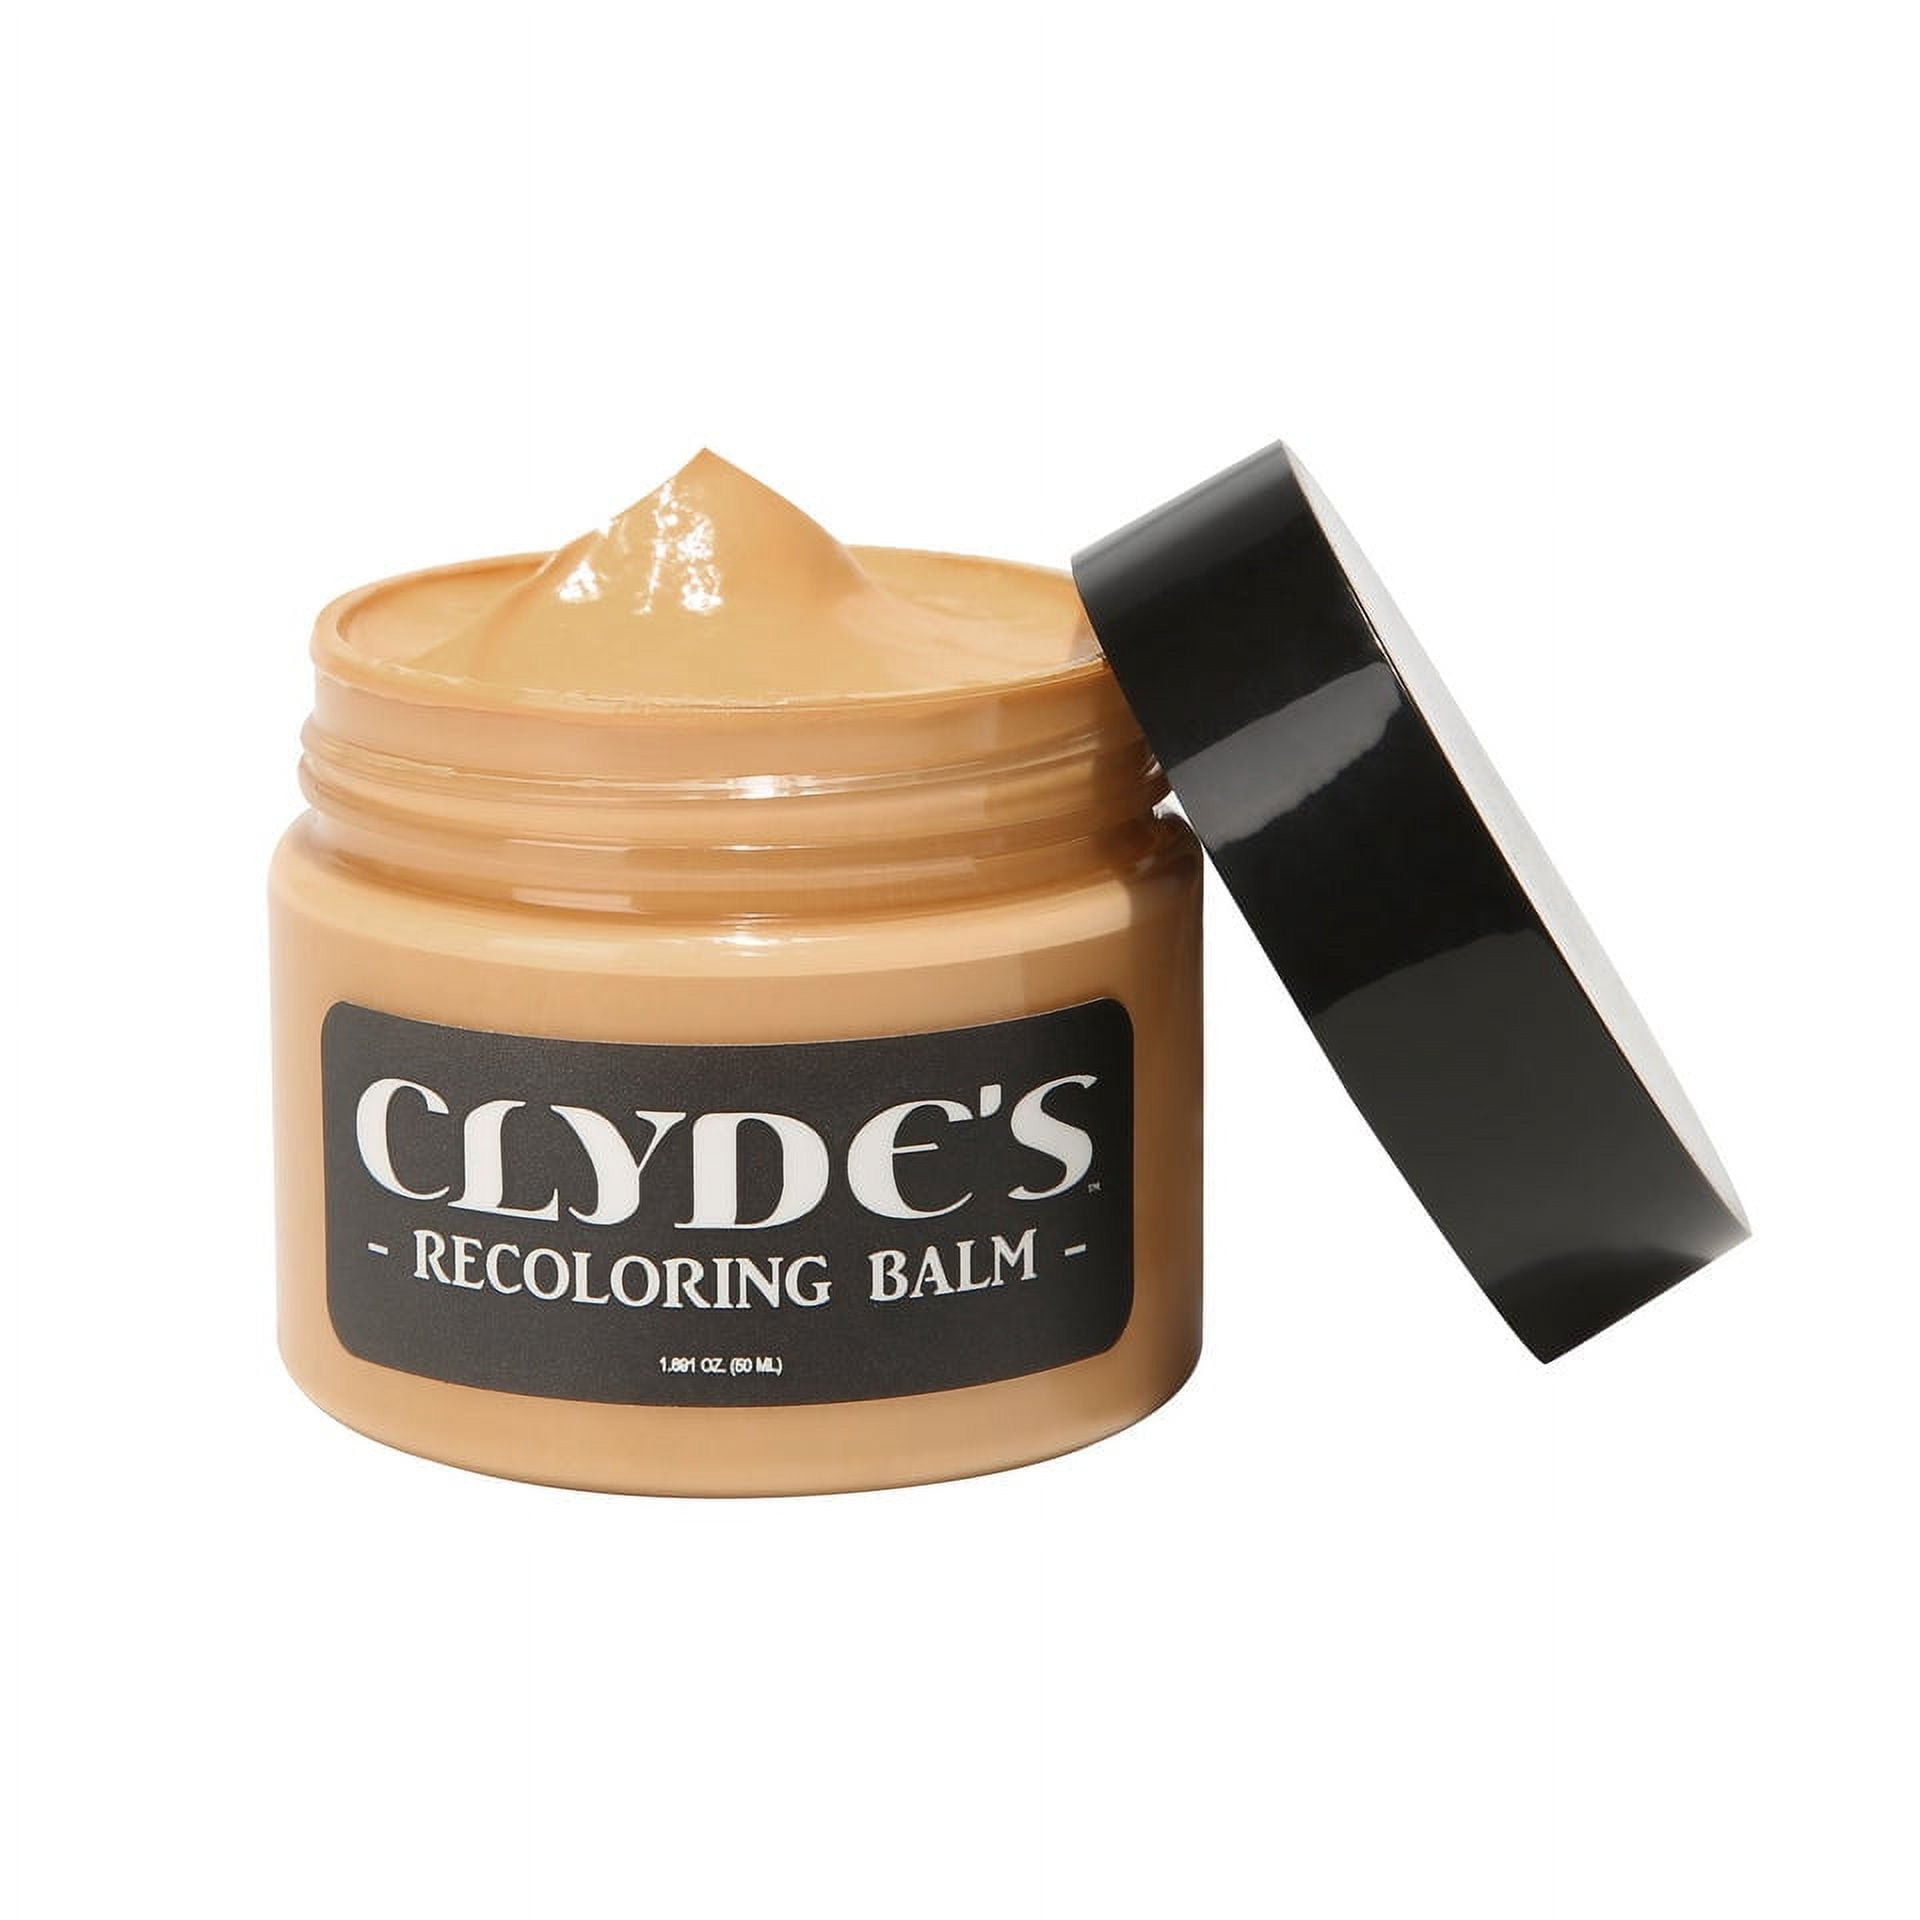 😱 TODAY ONLY: Recoloring Balm for $1 ONLY 😱 - Clyde's Leather